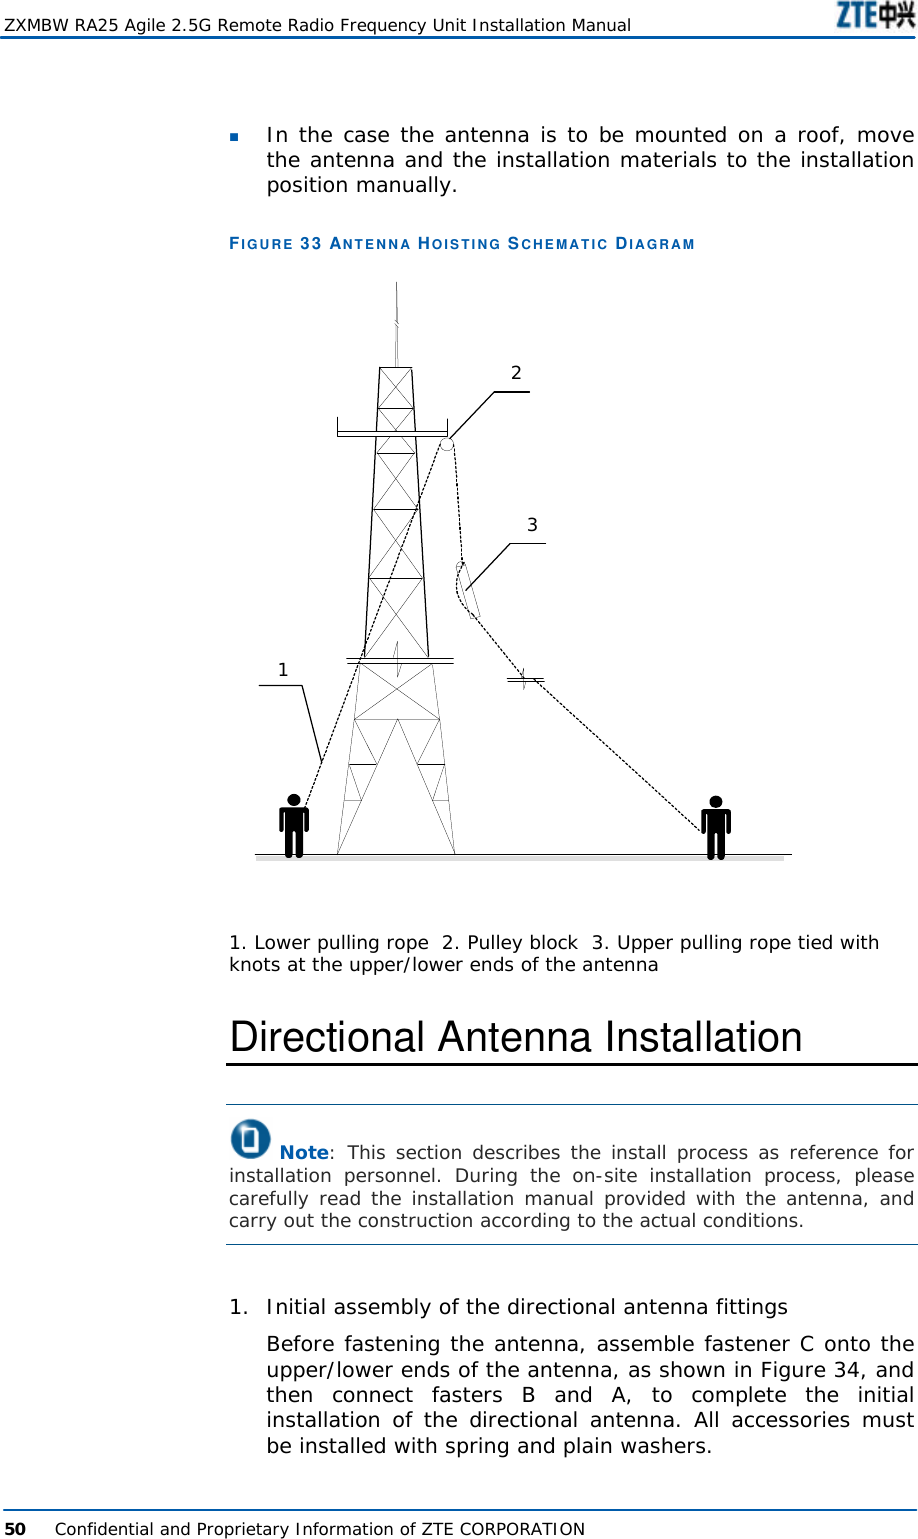  ZXMBW RA25 Agile 2.5G Remote Radio Frequency Unit Installation Manual  50      Confidential and Proprietary Information of ZTE CORPORATION  n In the case the antenna is to be mounted on a roof, move the antenna and the installation materials to the installation position manually.  FIGURE 33 ANTENNA HOISTING SCHEMATIC DIAGRAM １２３  1. Lower pulling rope  2. Pulley block  3. Upper pulling rope tied with knots at the upper/lower ends of the antenna Directional Antenna Installation  Note: This section describes the install process as reference for installation personnel. During the on-site installation process, please carefully read the installation manual provided with the antenna, and carry out the construction according to the actual conditions.   1. Initial assembly of the directional antenna fittings Before fastening the antenna, assemble fastener C onto the upper/lower ends of the antenna, as shown in Figure 34, and then connect fasters B and A, to complete the initial installation of the directional antenna. All accessories must be installed with spring and plain washers.  